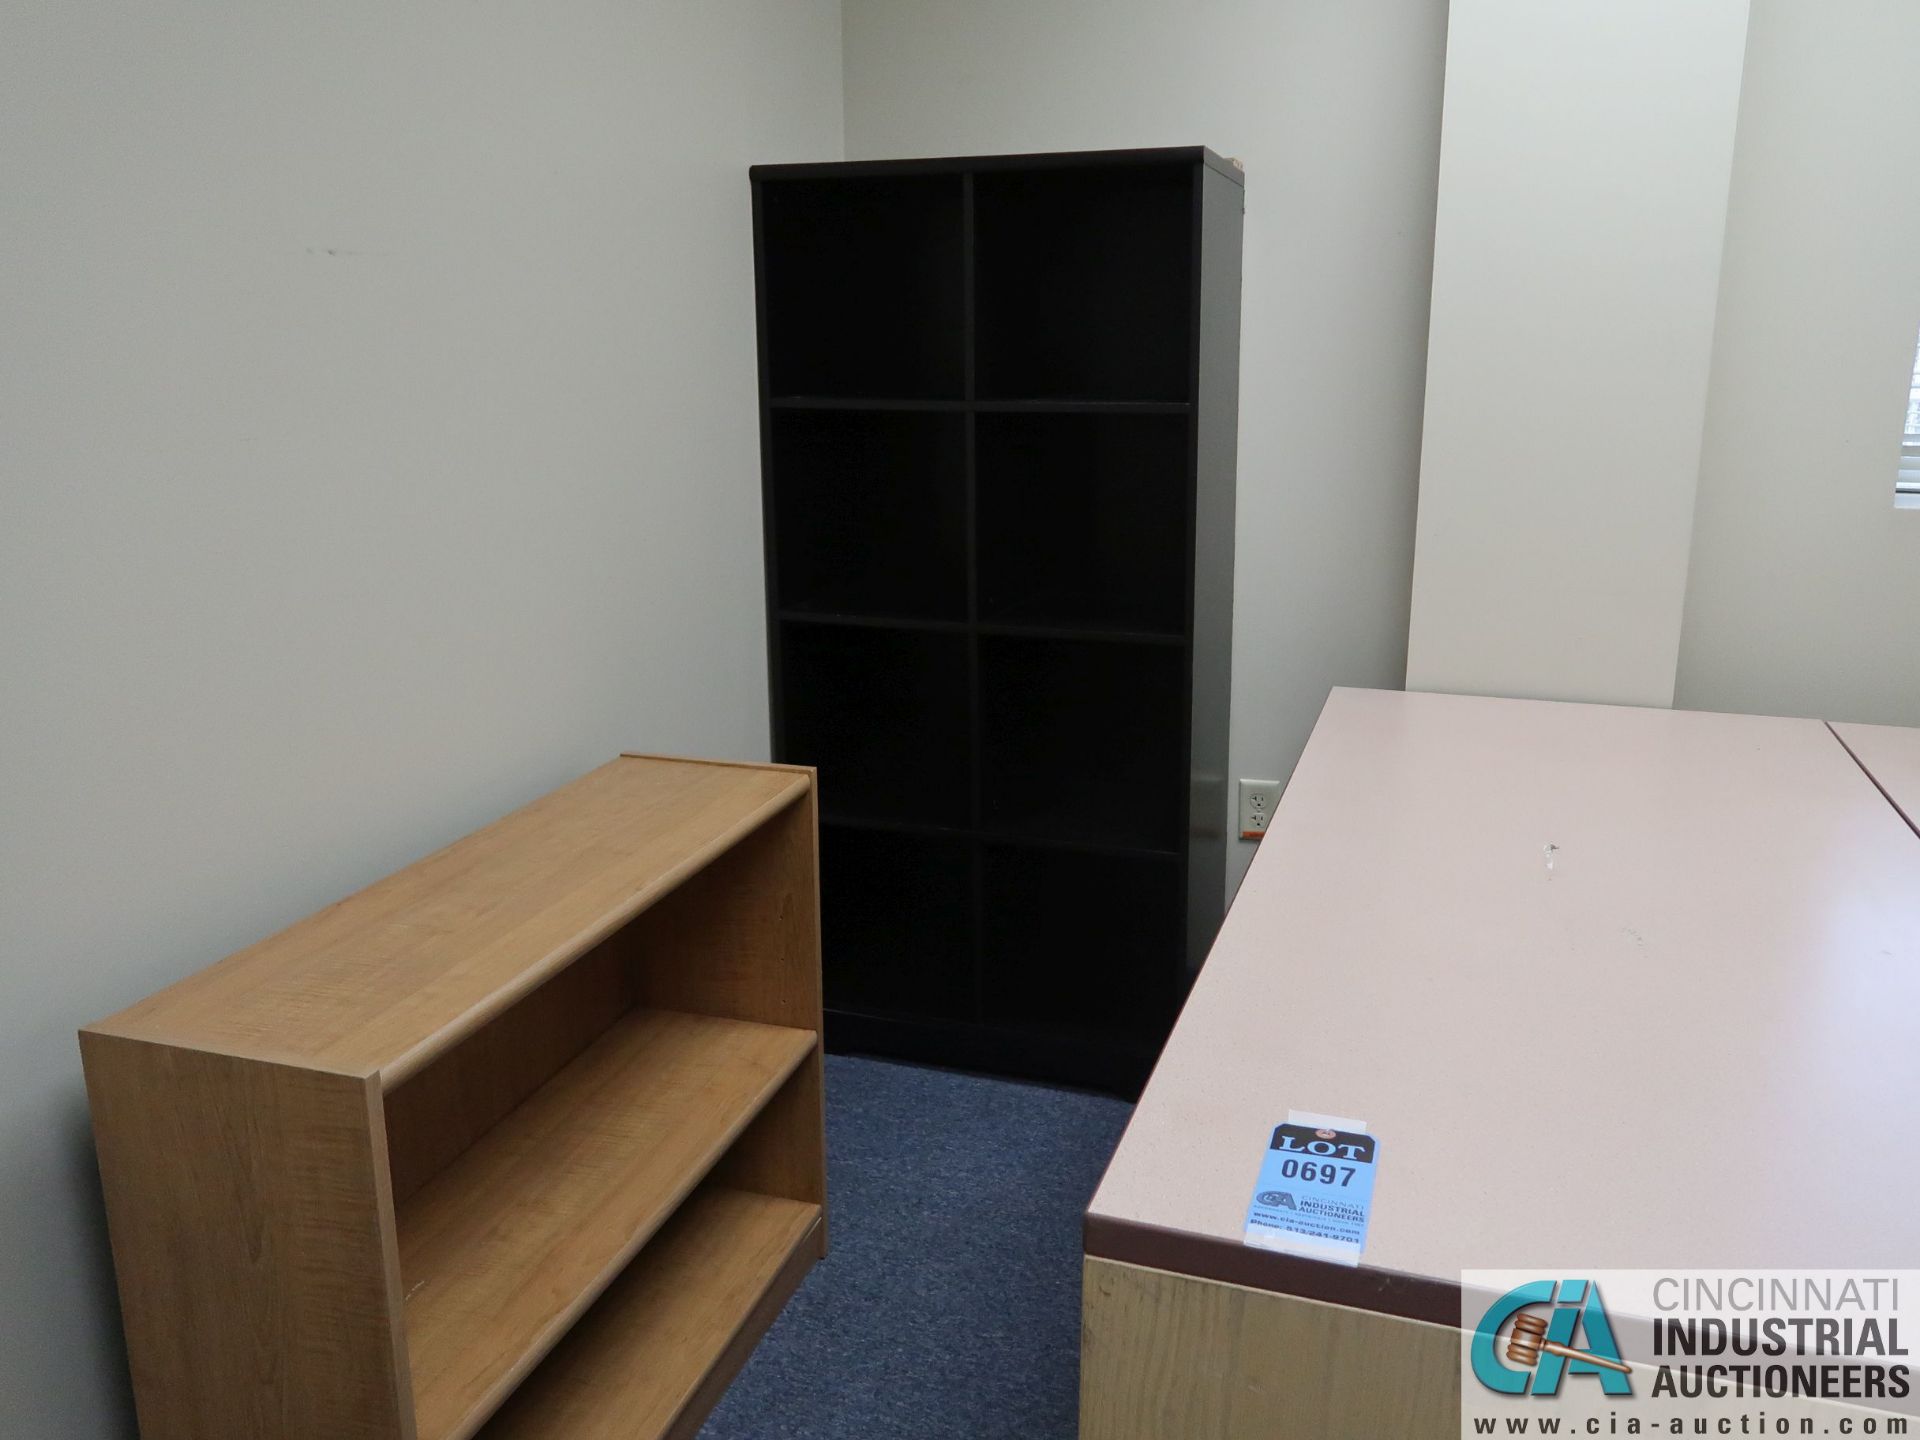 (LOT) L-SHAPED MODULAR DESK WITH BOOKCASE, FILE CABINET AND CHAIRS - Image 2 of 3